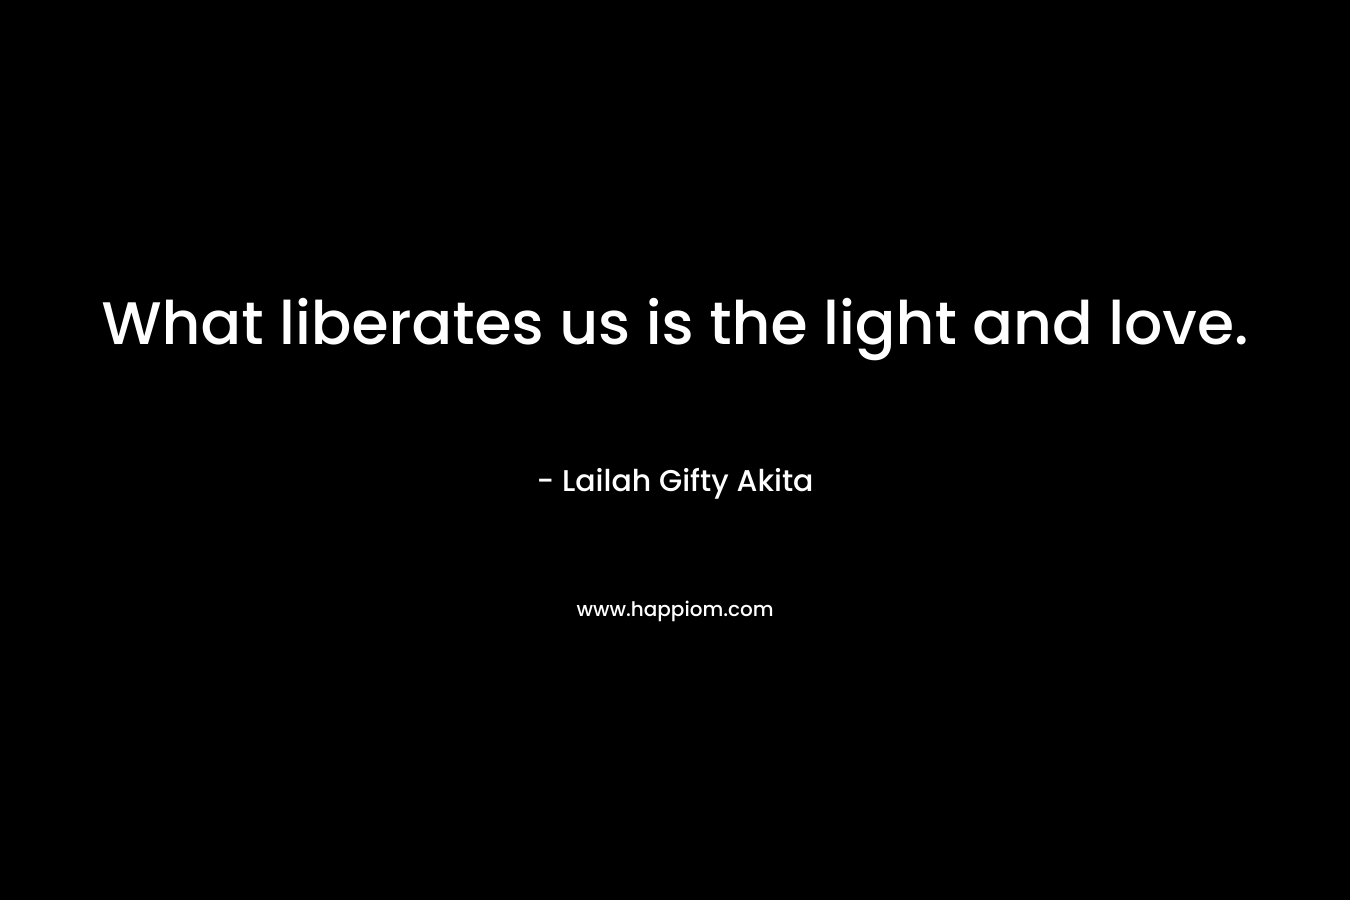 What liberates us is the light and love.